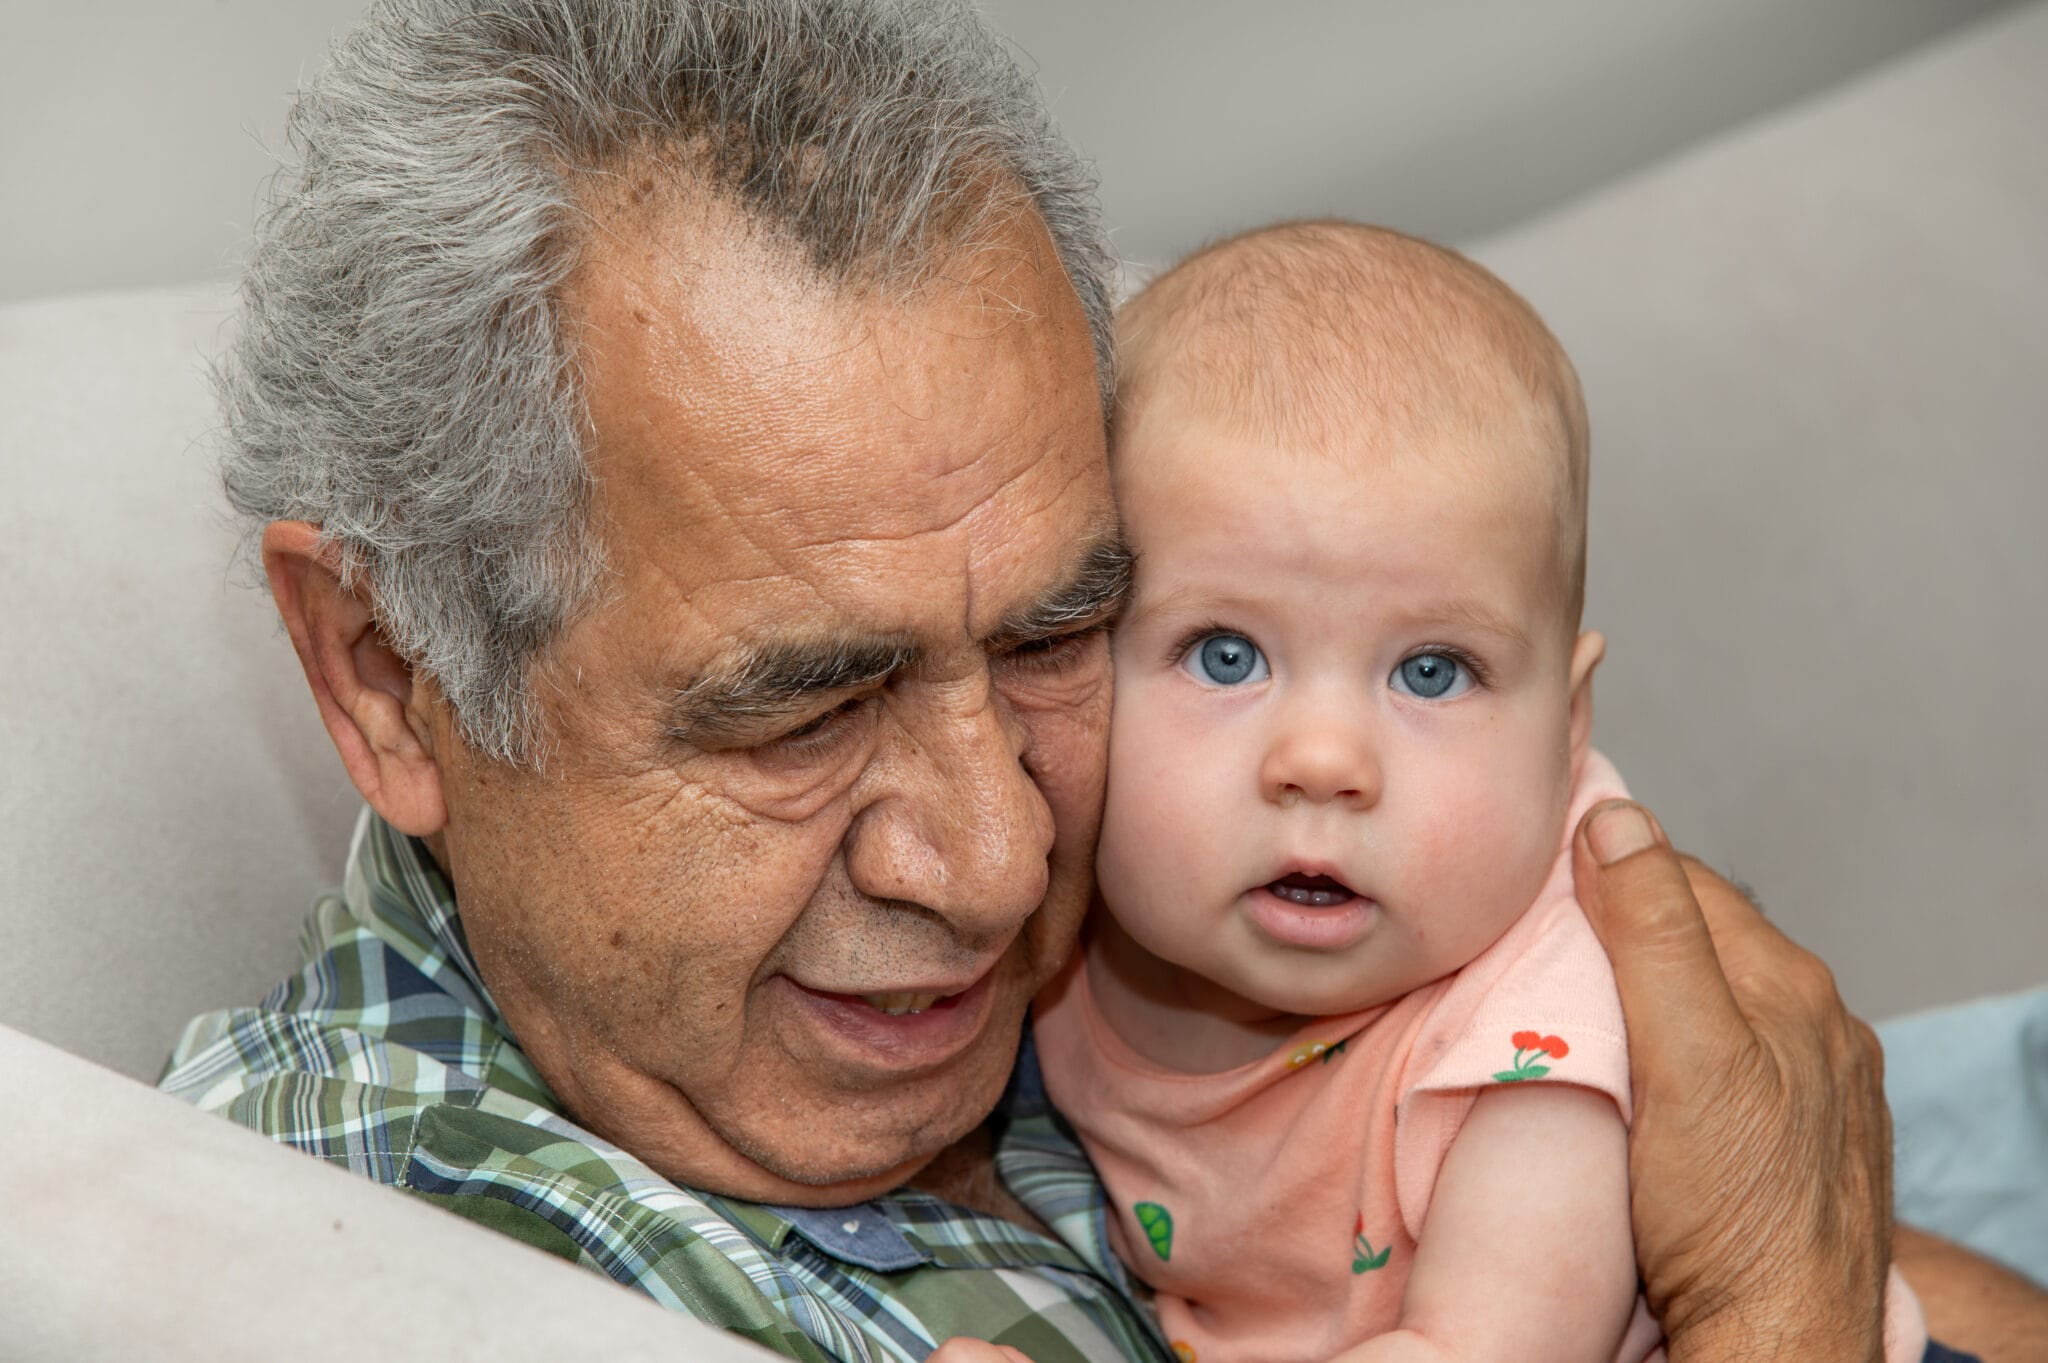 A wrinkled old man with short, silver hair cuddles an infant gently up to his cheek.